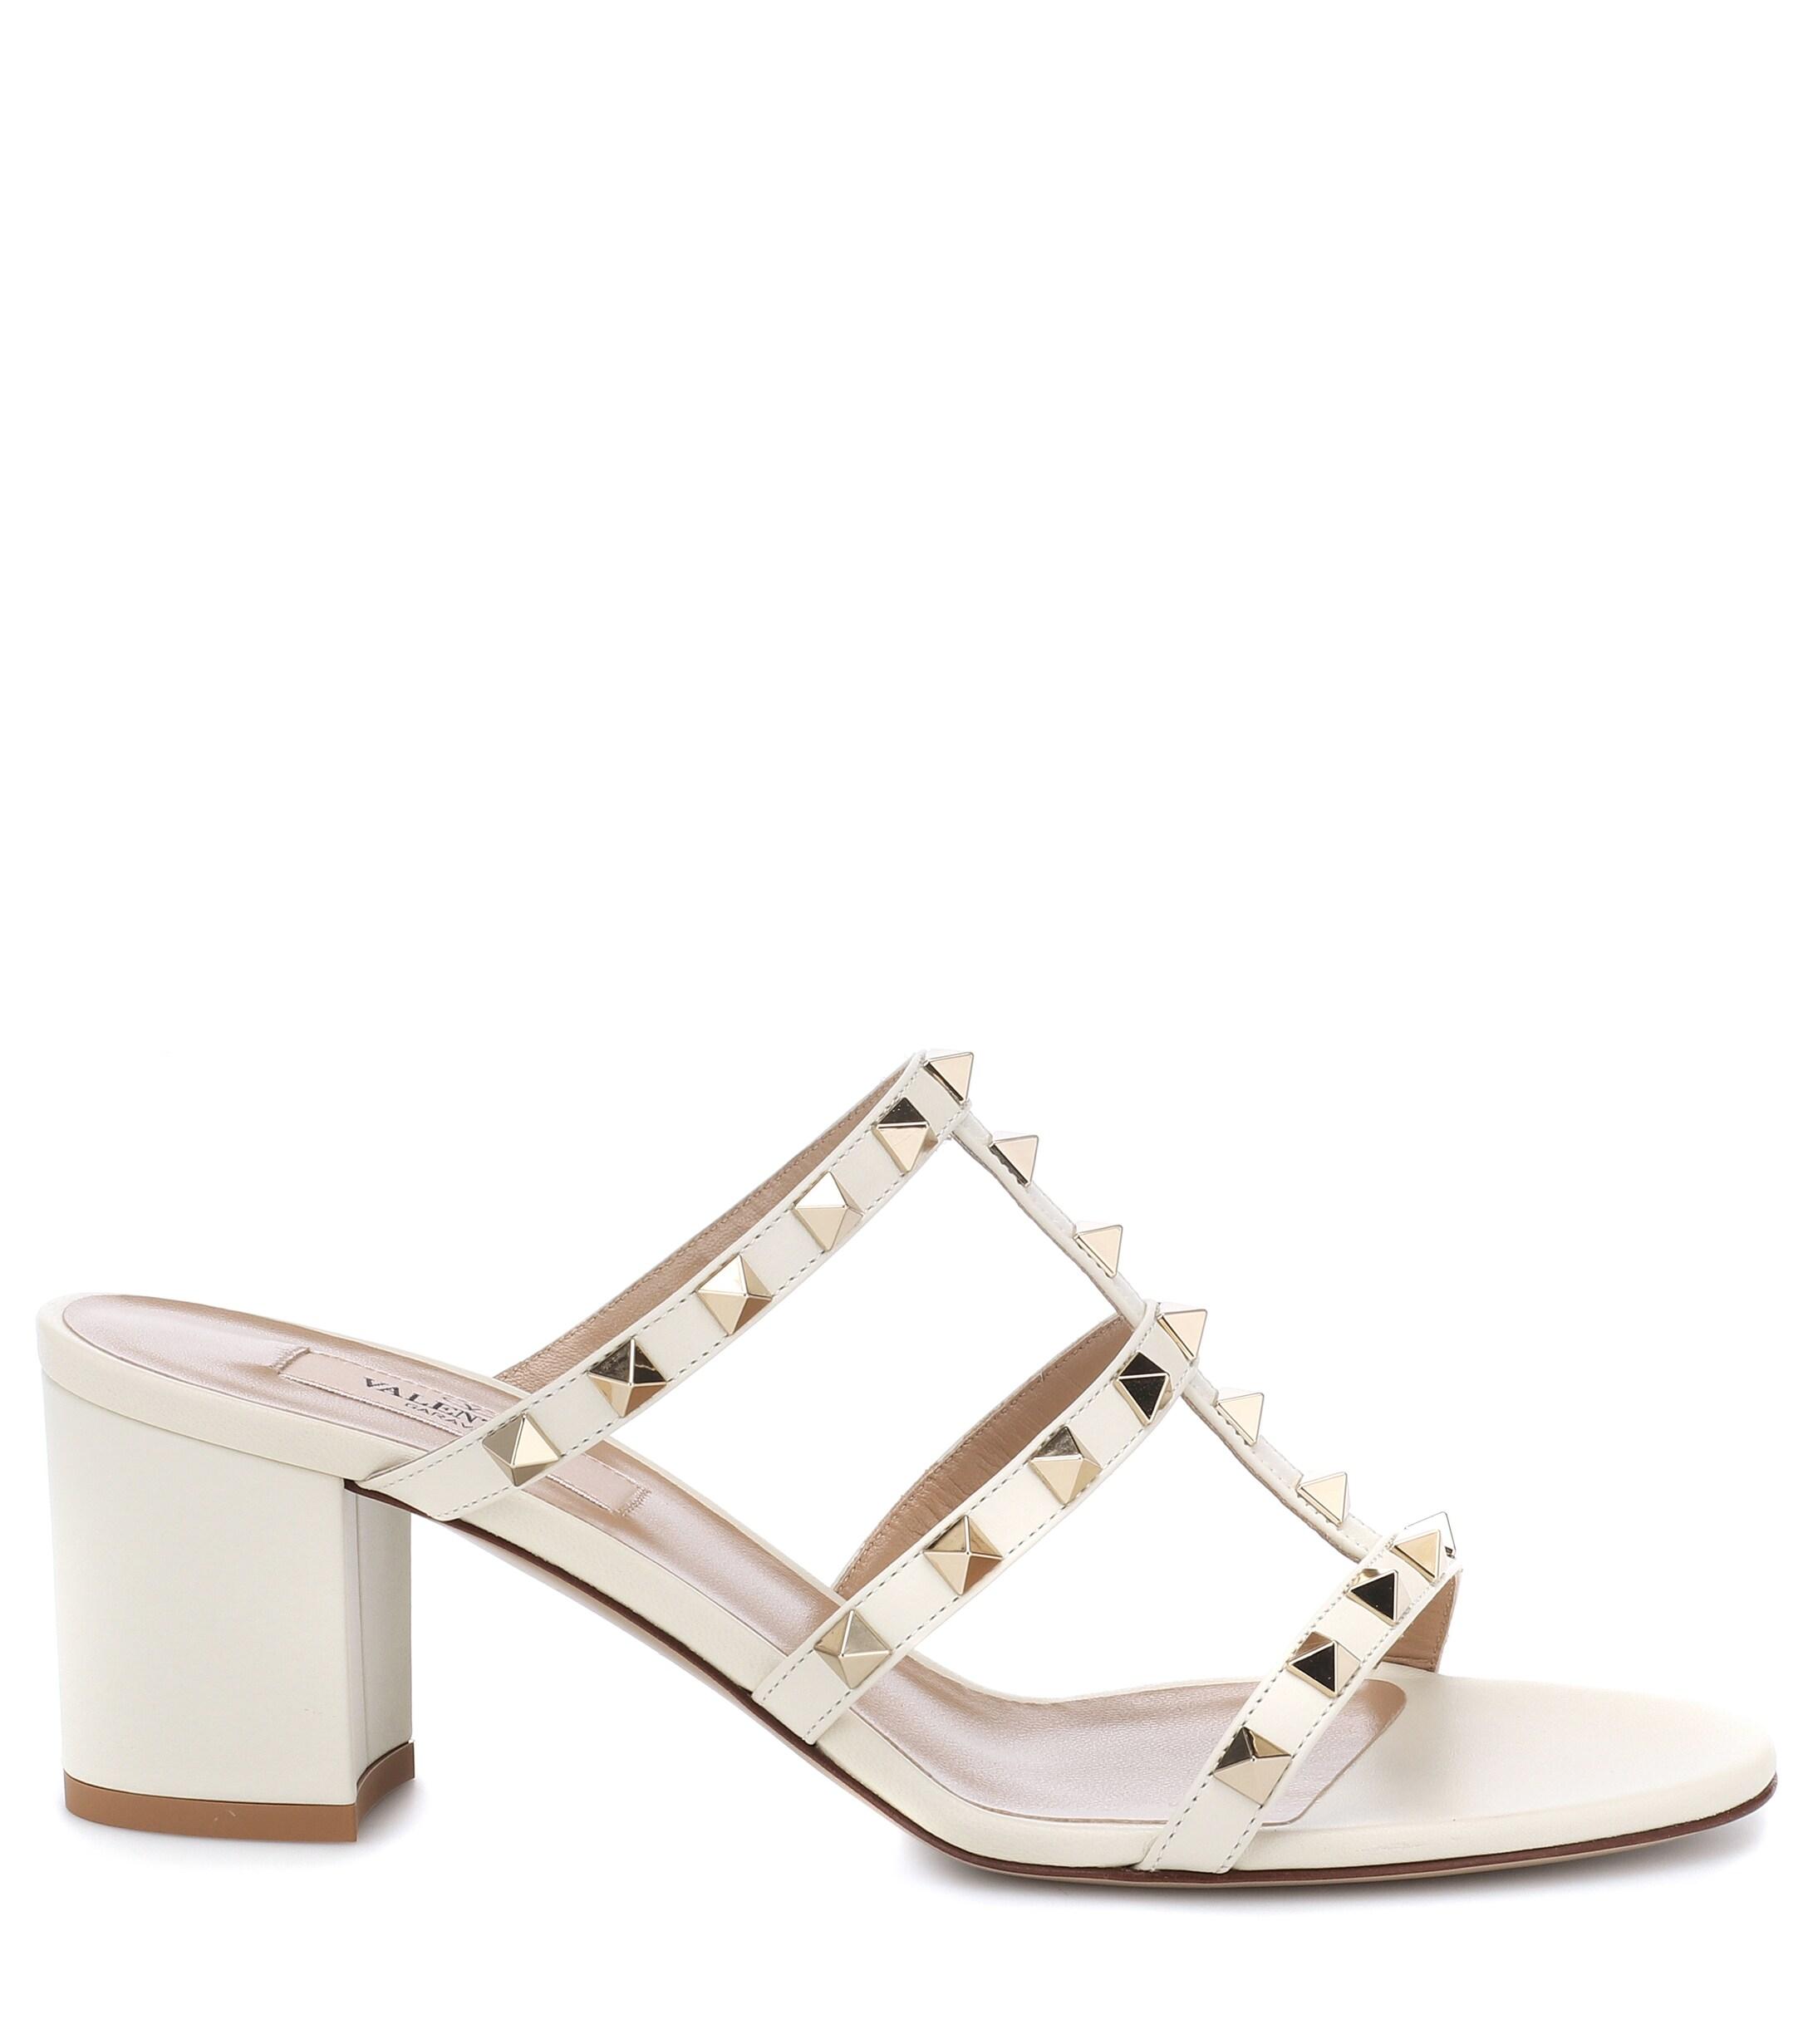 Valentino Rockstud Spike Leather Sandals in White - Lyst